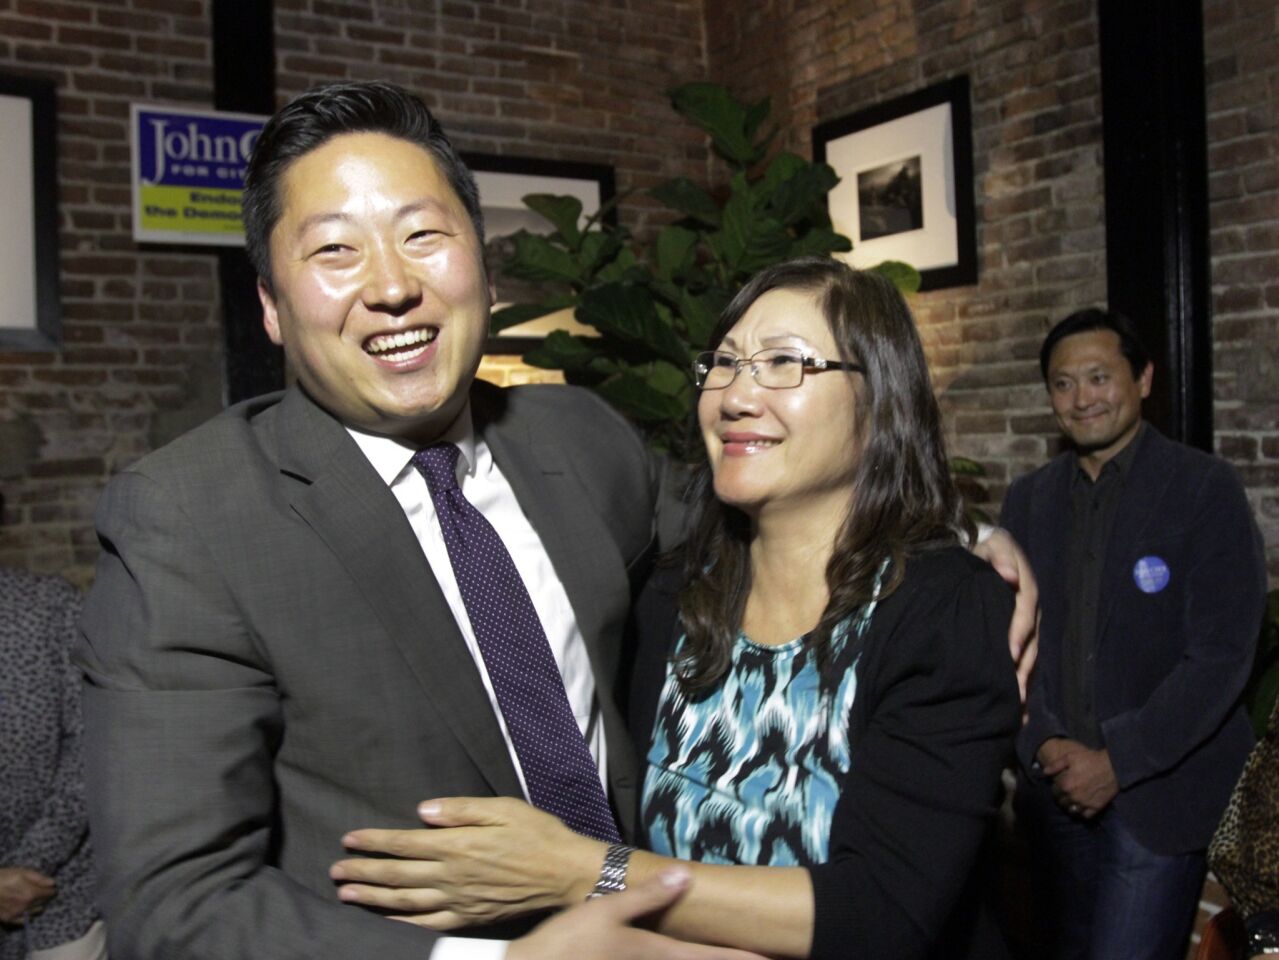 John Choi, a candidate for Council District 13, hugs his mother, Myung Choi, on election night at Mohawk Bend Restaurant.